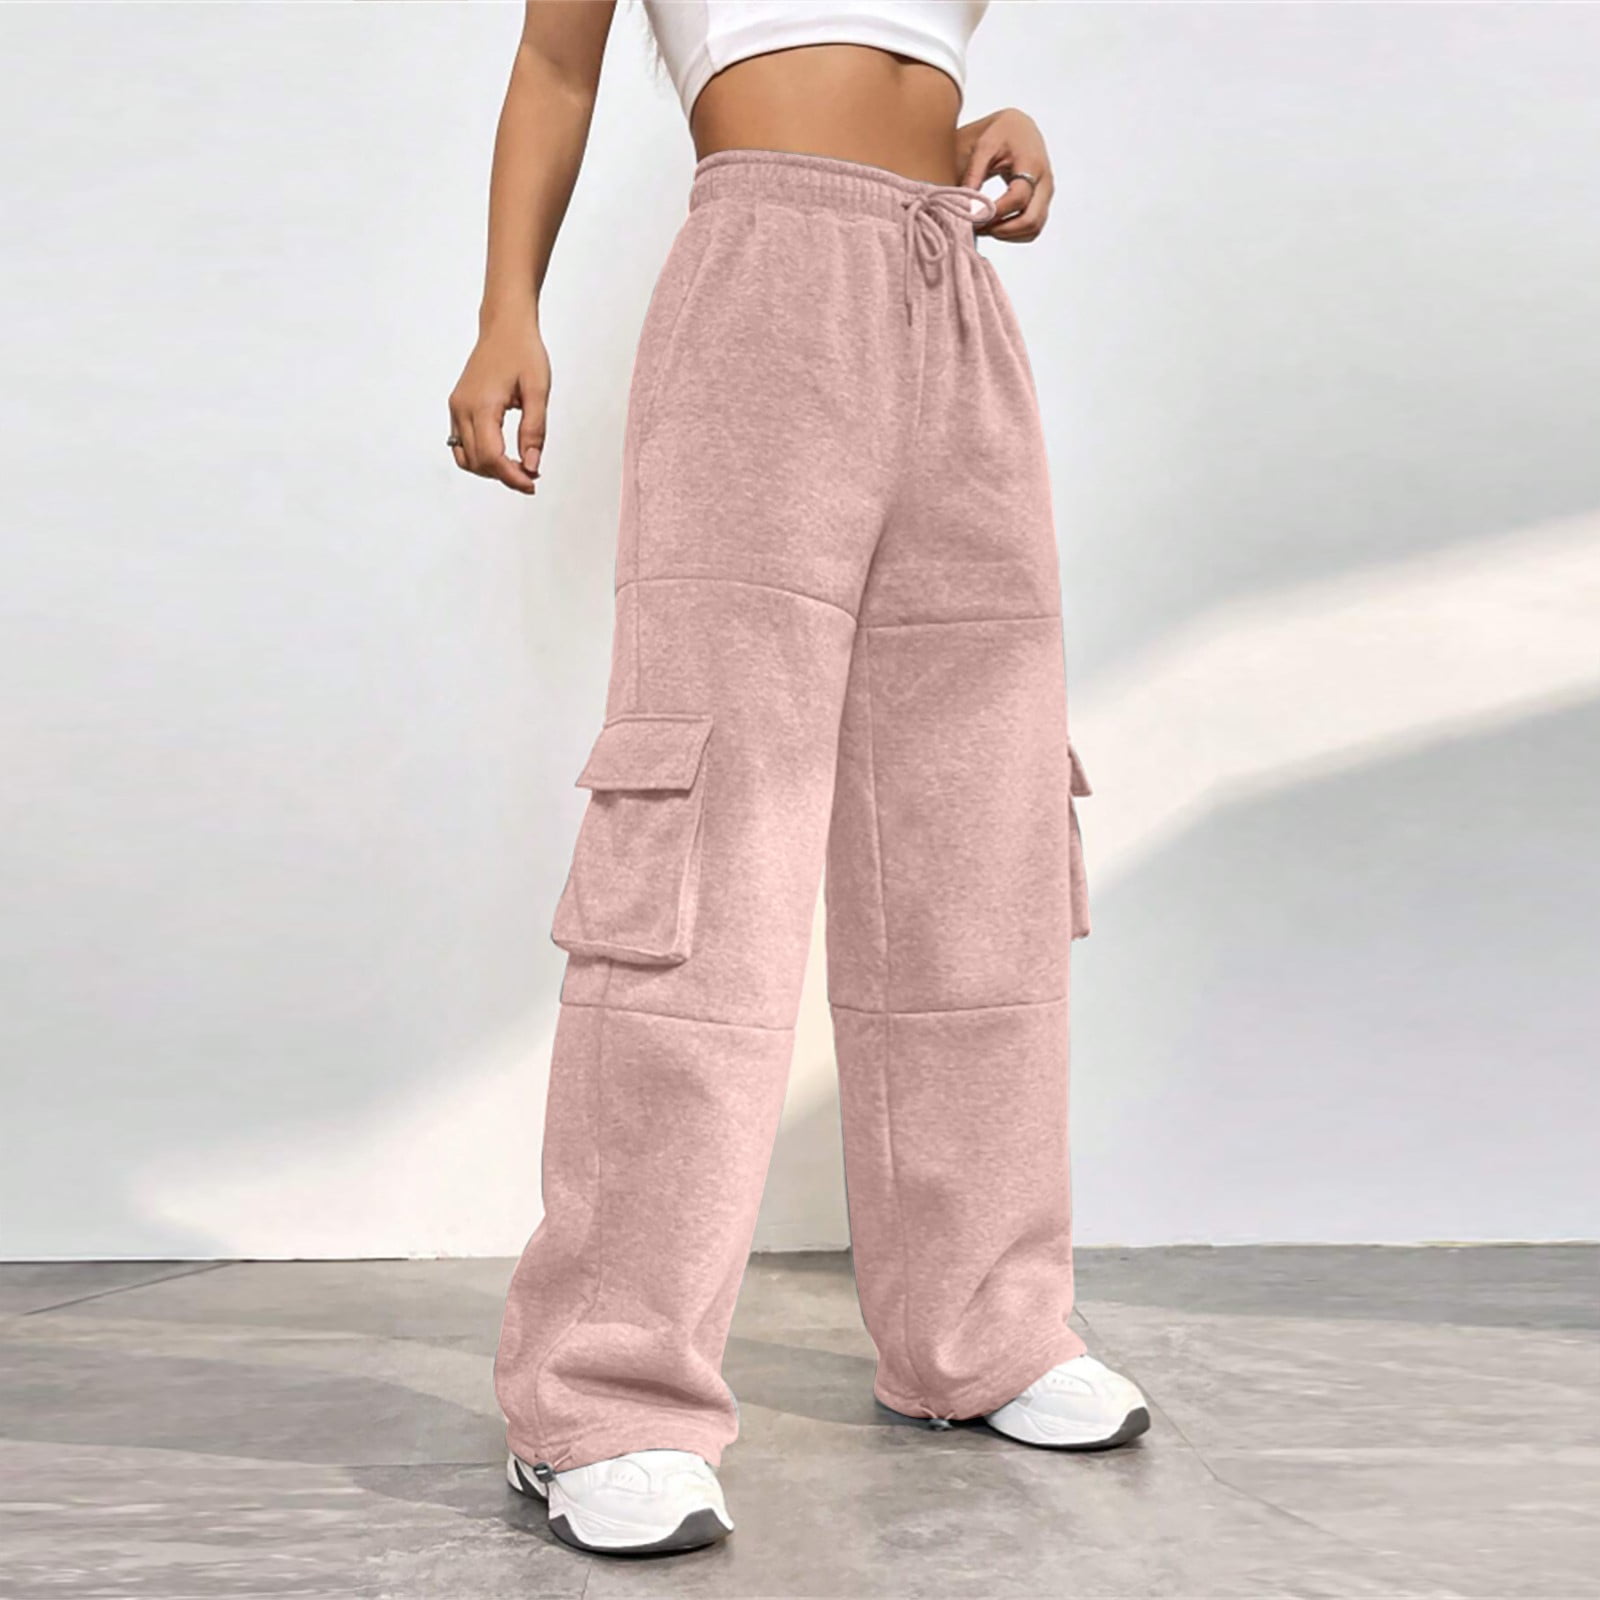 Susanny Petite Sweatpants for Women Elastic Ankle Cinch Bottom Drawstring  High Waisted with Pockets Straight Leg Sweat Pants Fall Cotton Baggy Pants  Long Trendy Jogger Pants Complexion S 